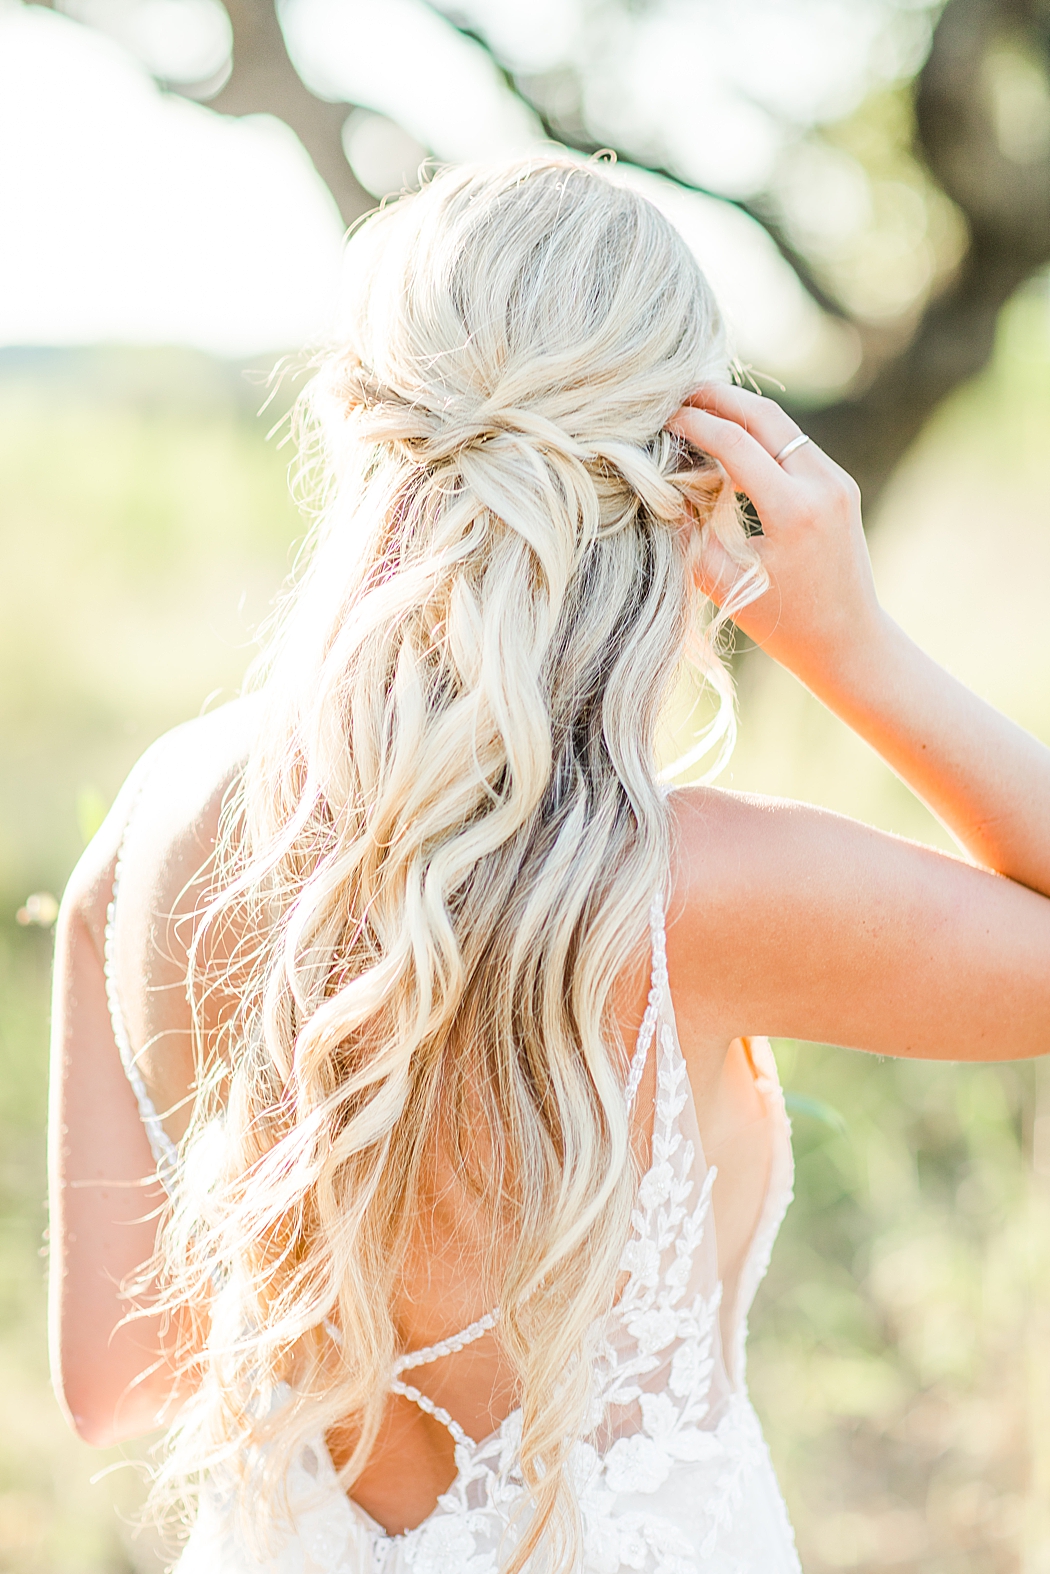 Summer Bridal Session at Contigo Ranch in Frederickburg Texas by Allison Jeffers Photography 0018